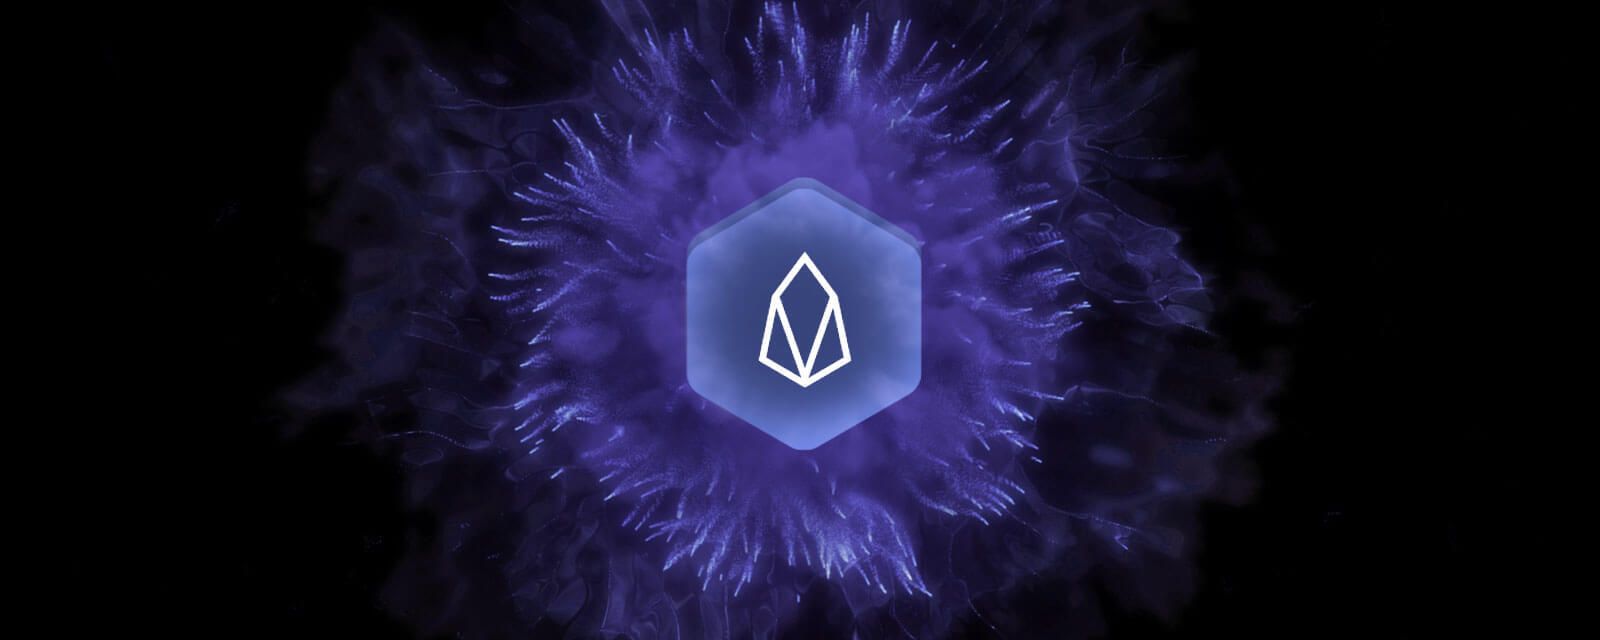 What is EOS? EOS Coin